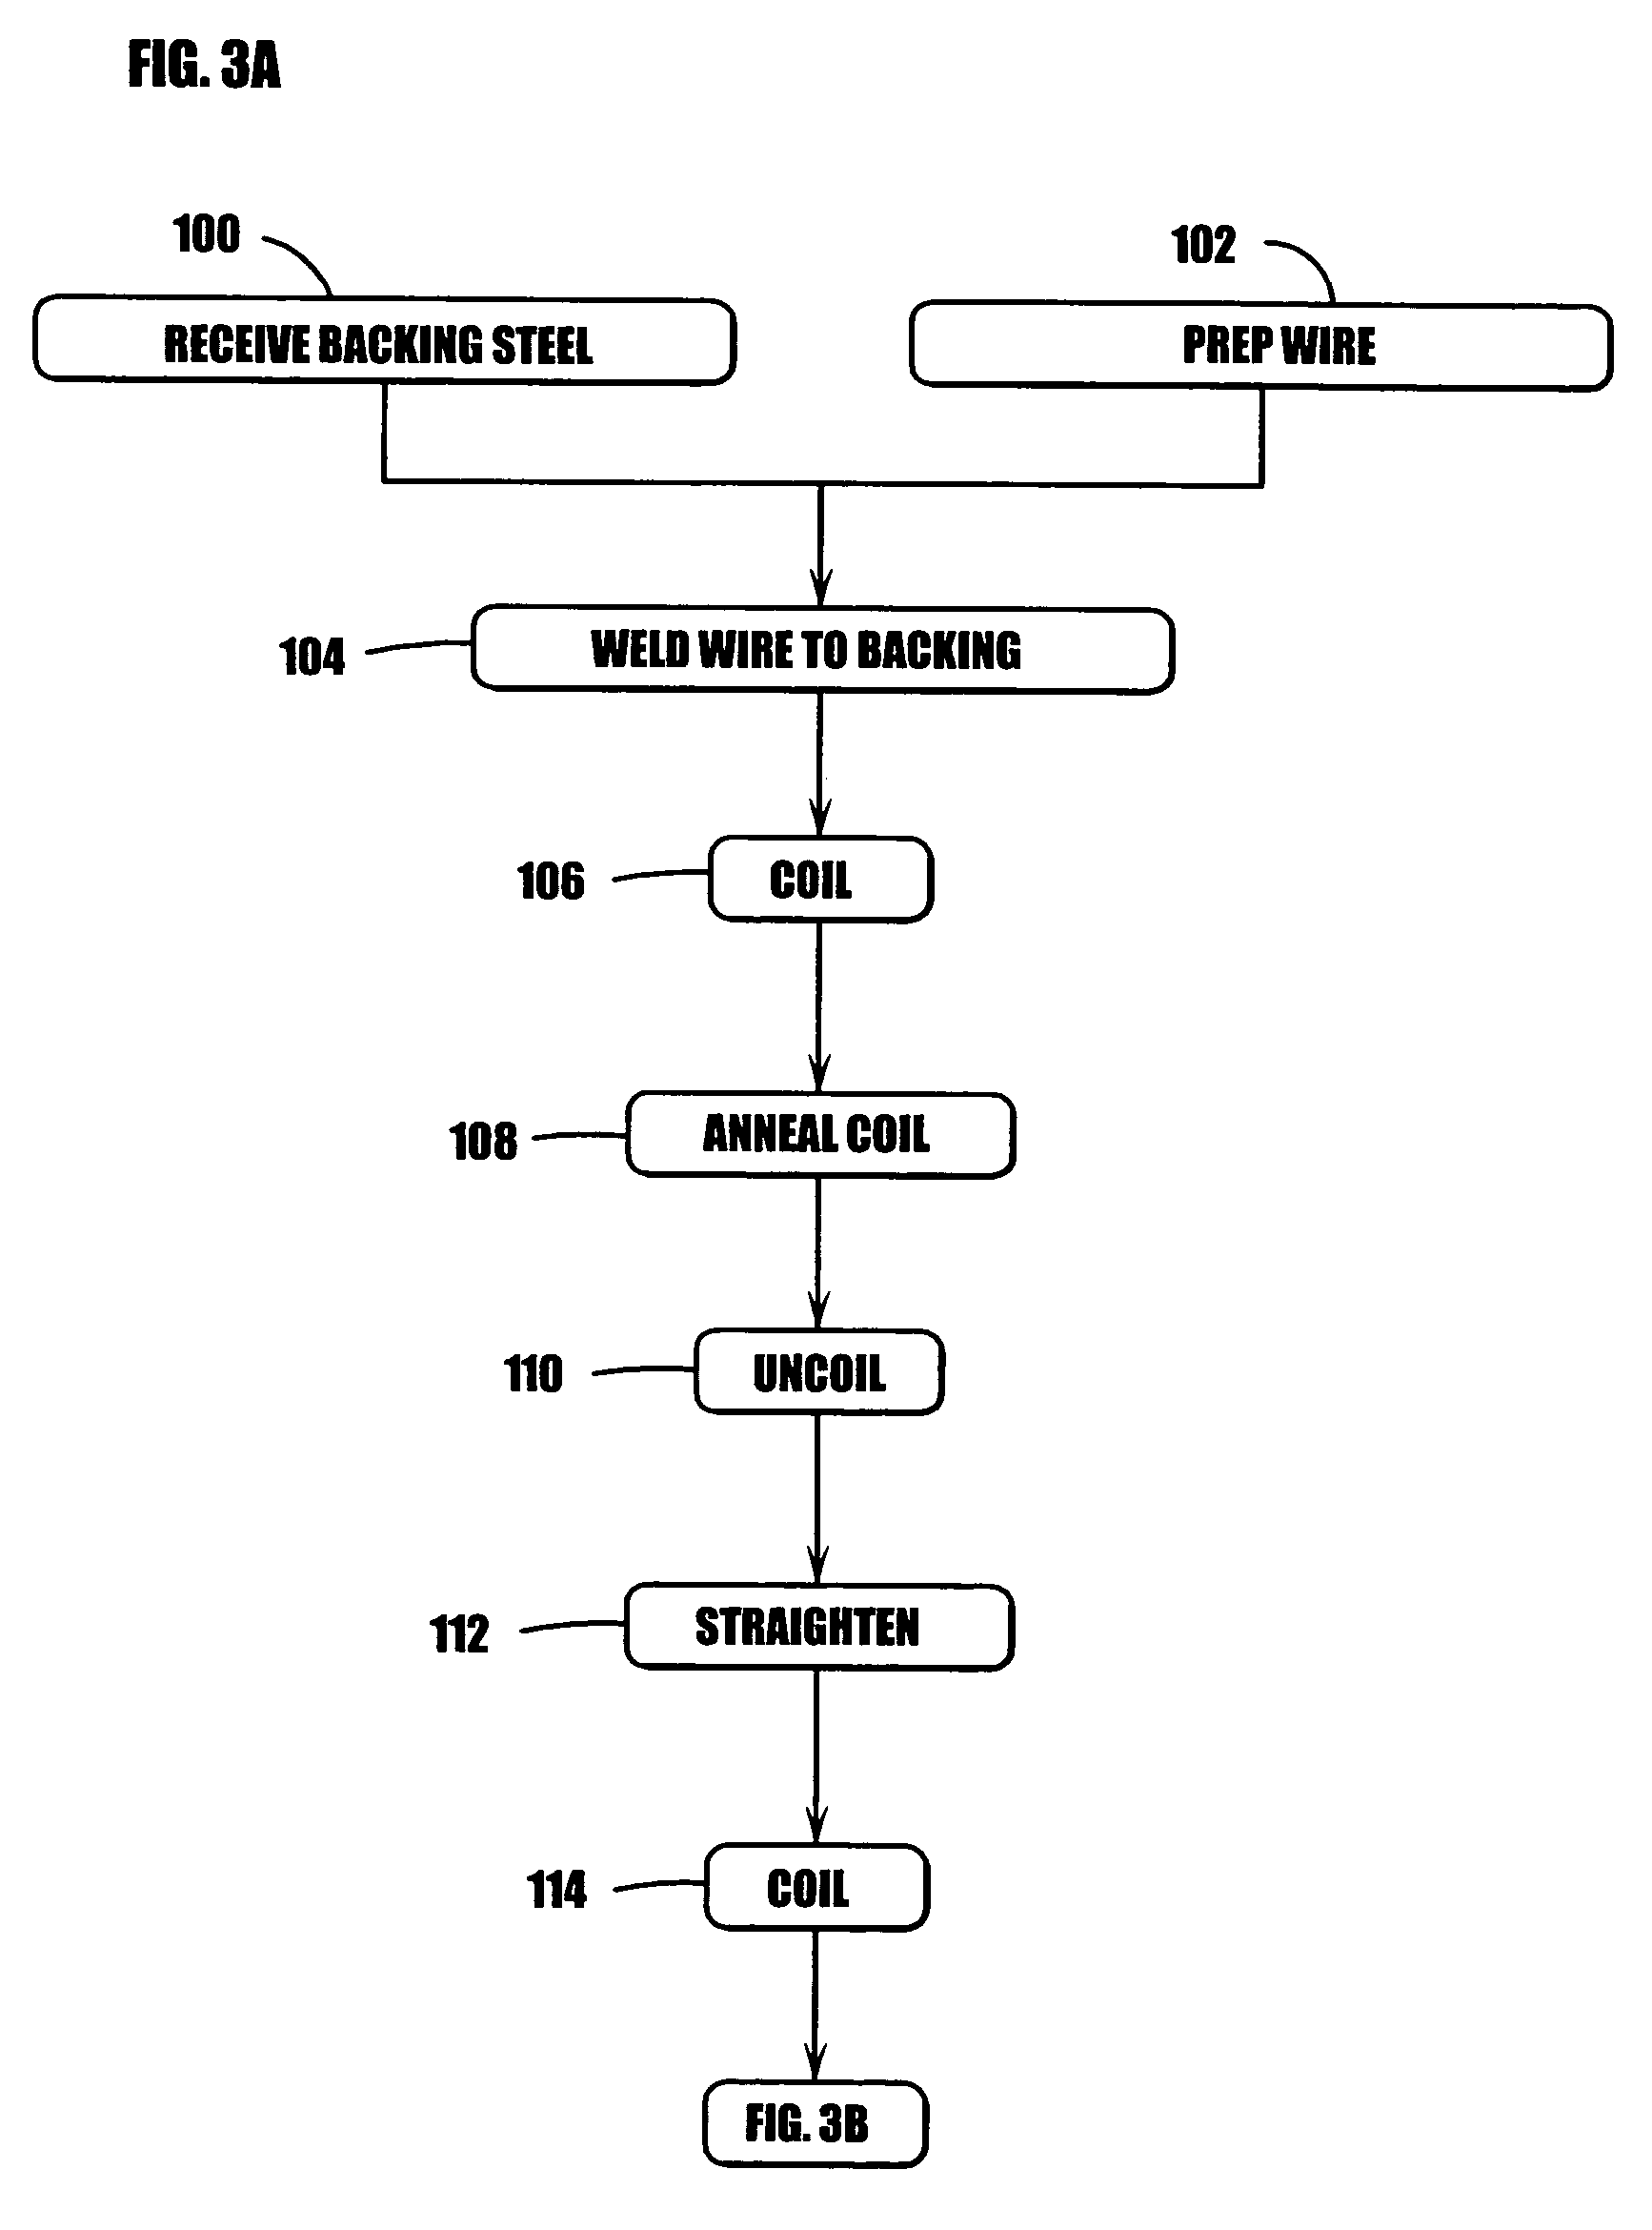 Method of making a composite utility blade